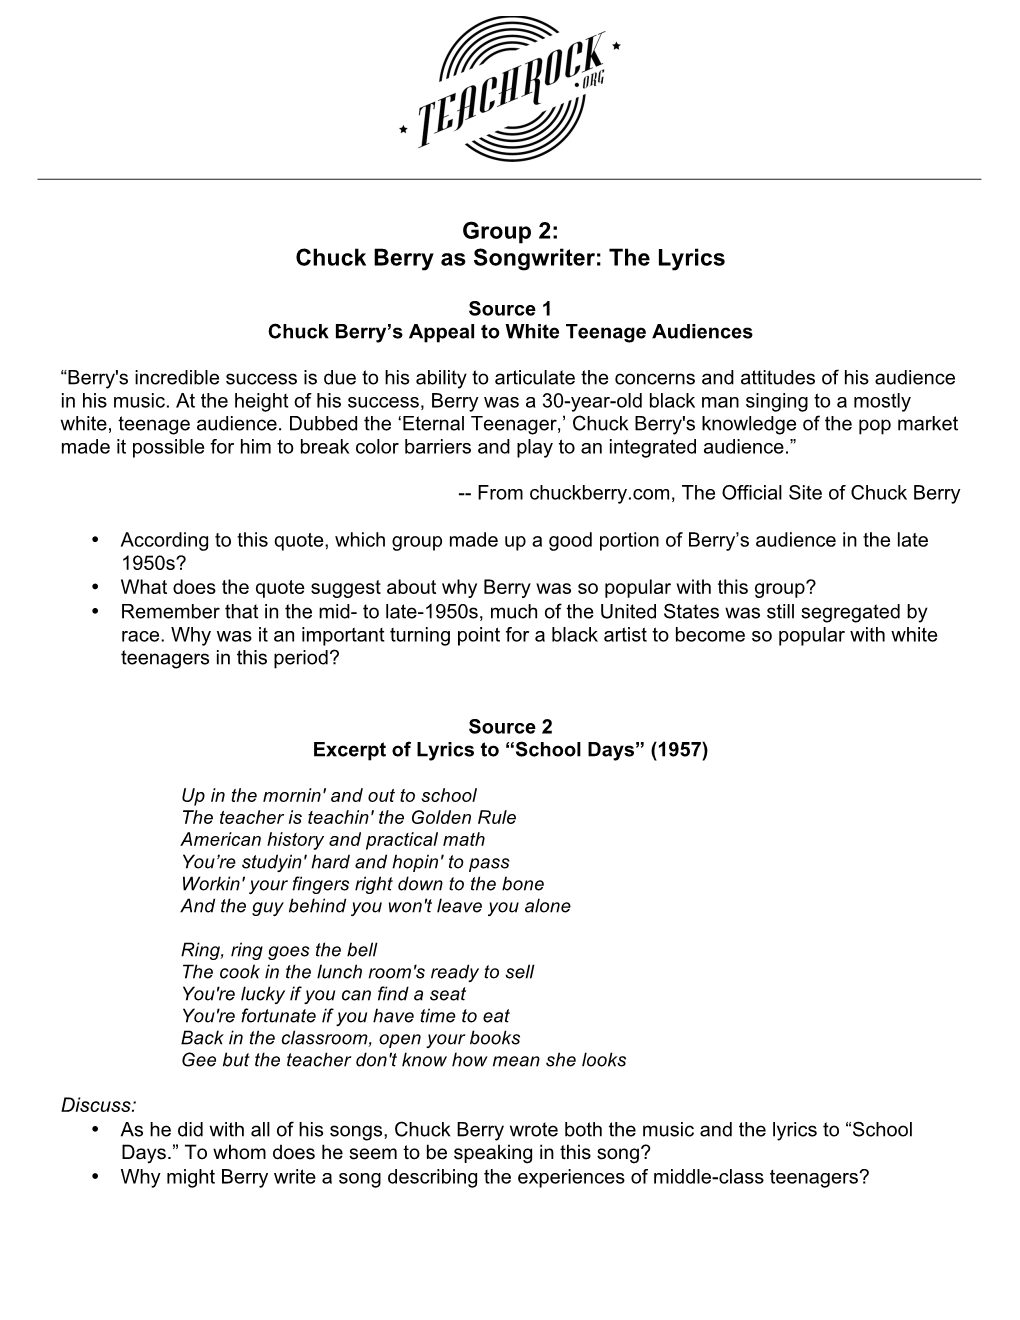 Group 2: Chuck Berry As Songwriter: the Lyrics